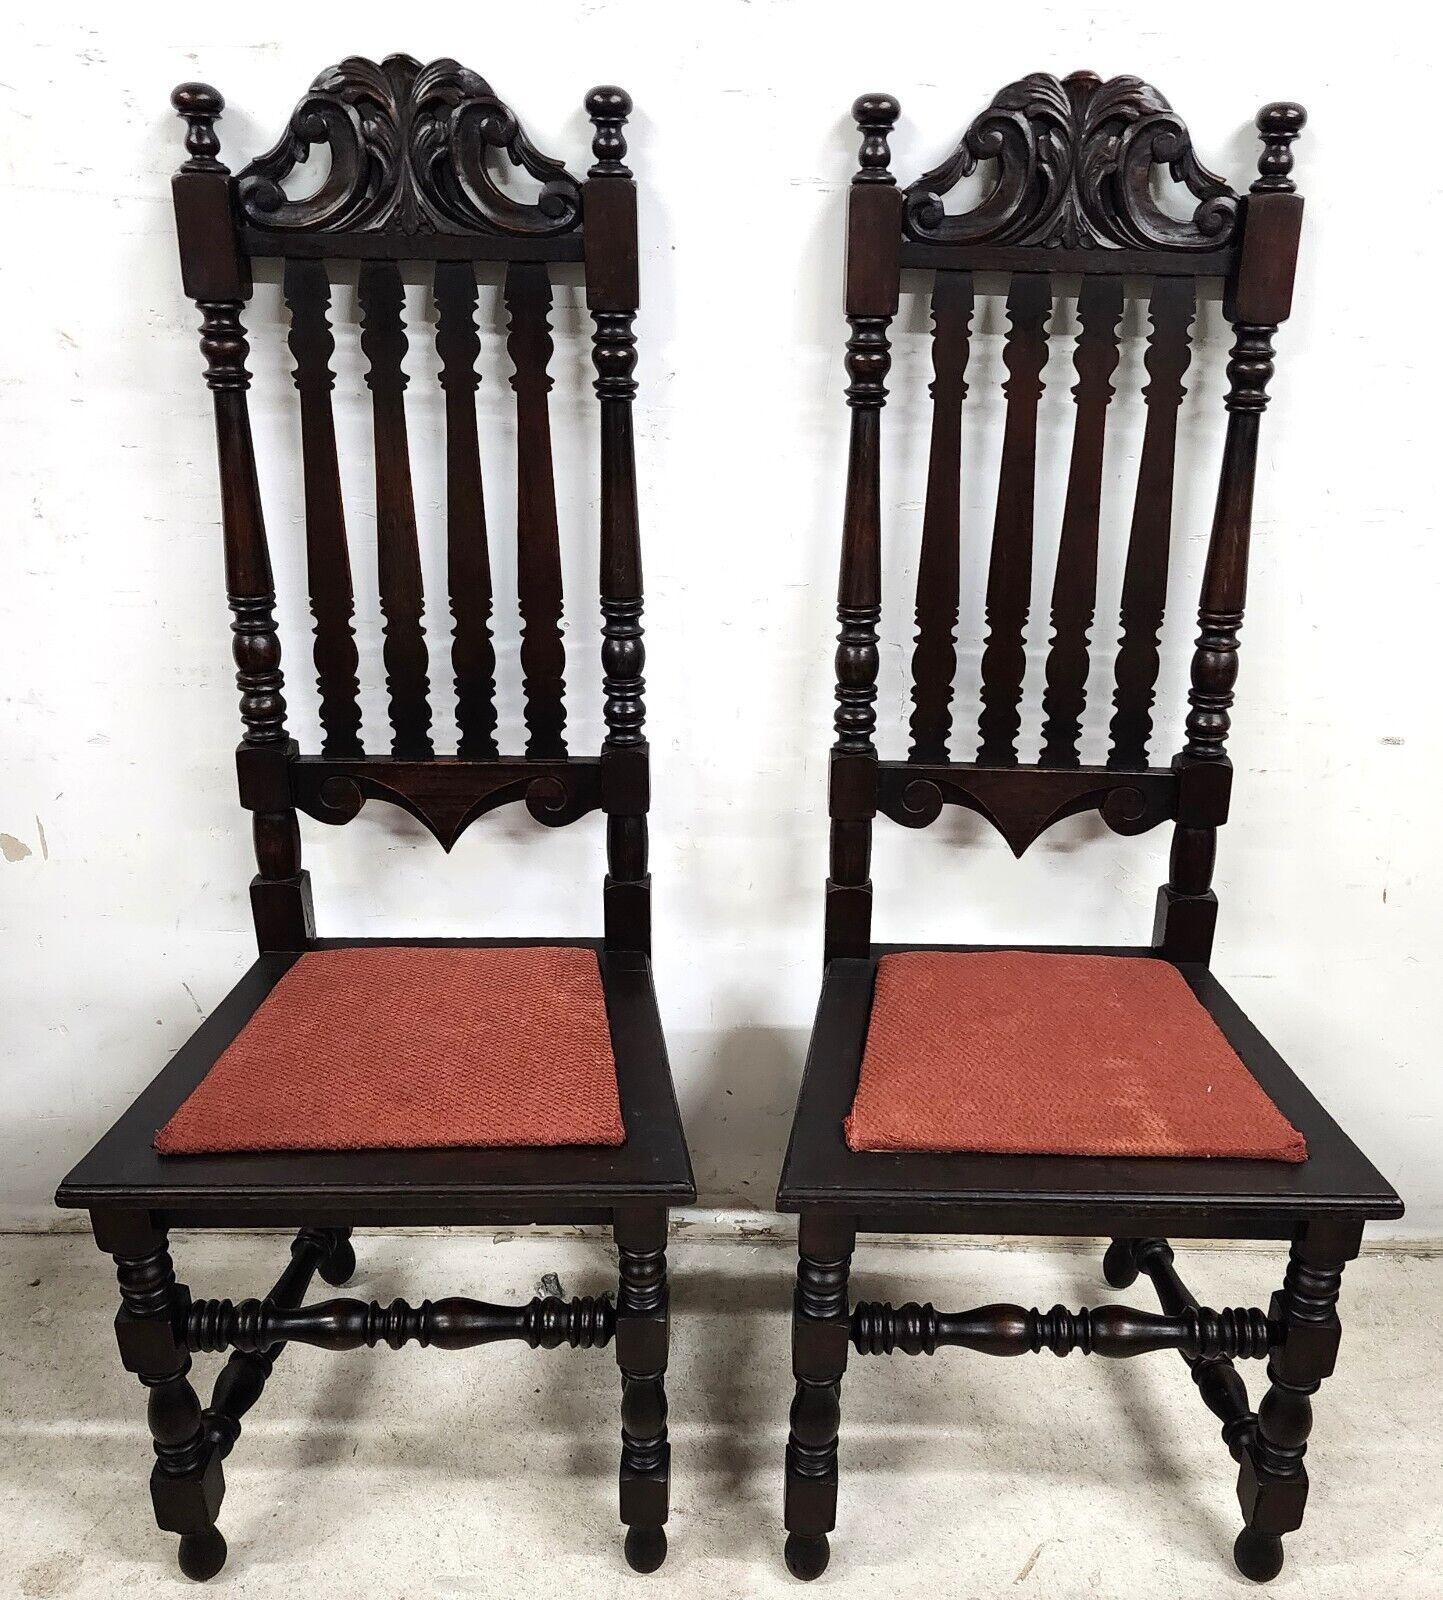 For FULL item description click on CONTINUE READING at the bottom of this page.

Offering One Of Our Recent Palm Beach Estate Fine Furniture Acquisitions Of A
Pair of 1800s Antique Hall Walnut Dining Accent Chairs 

Approximate Measurements in